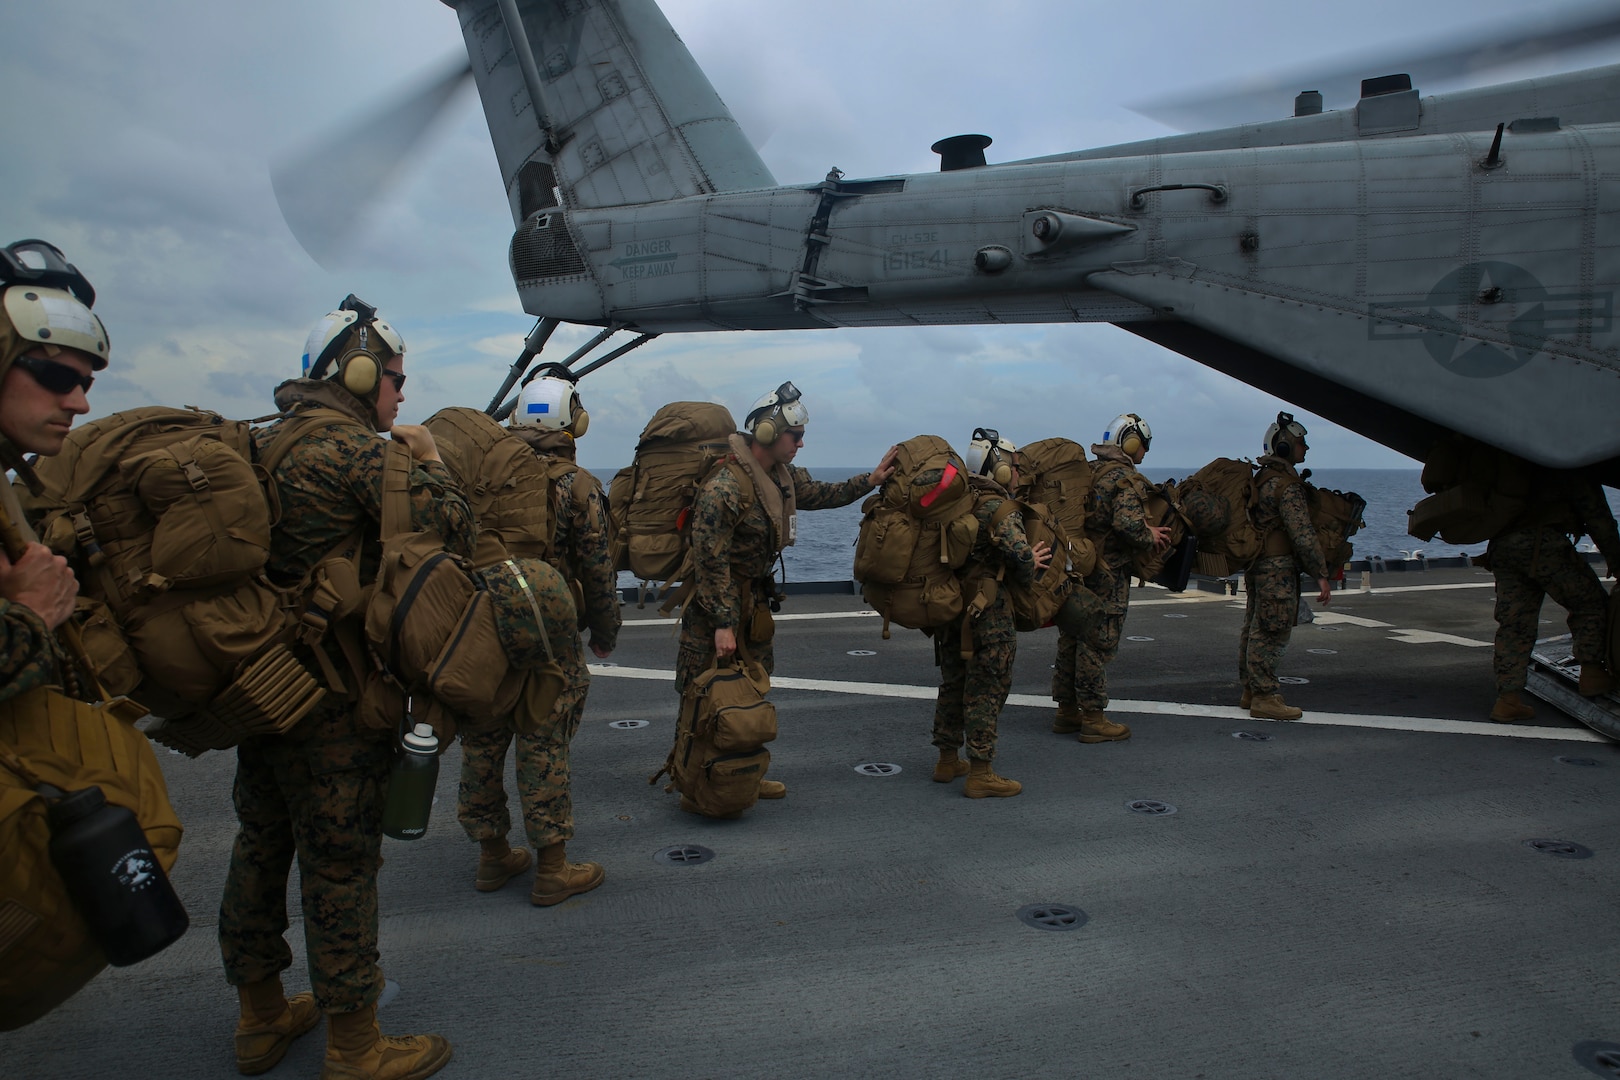 U.S. Marines board a helicopter on USS Gunston Hall.